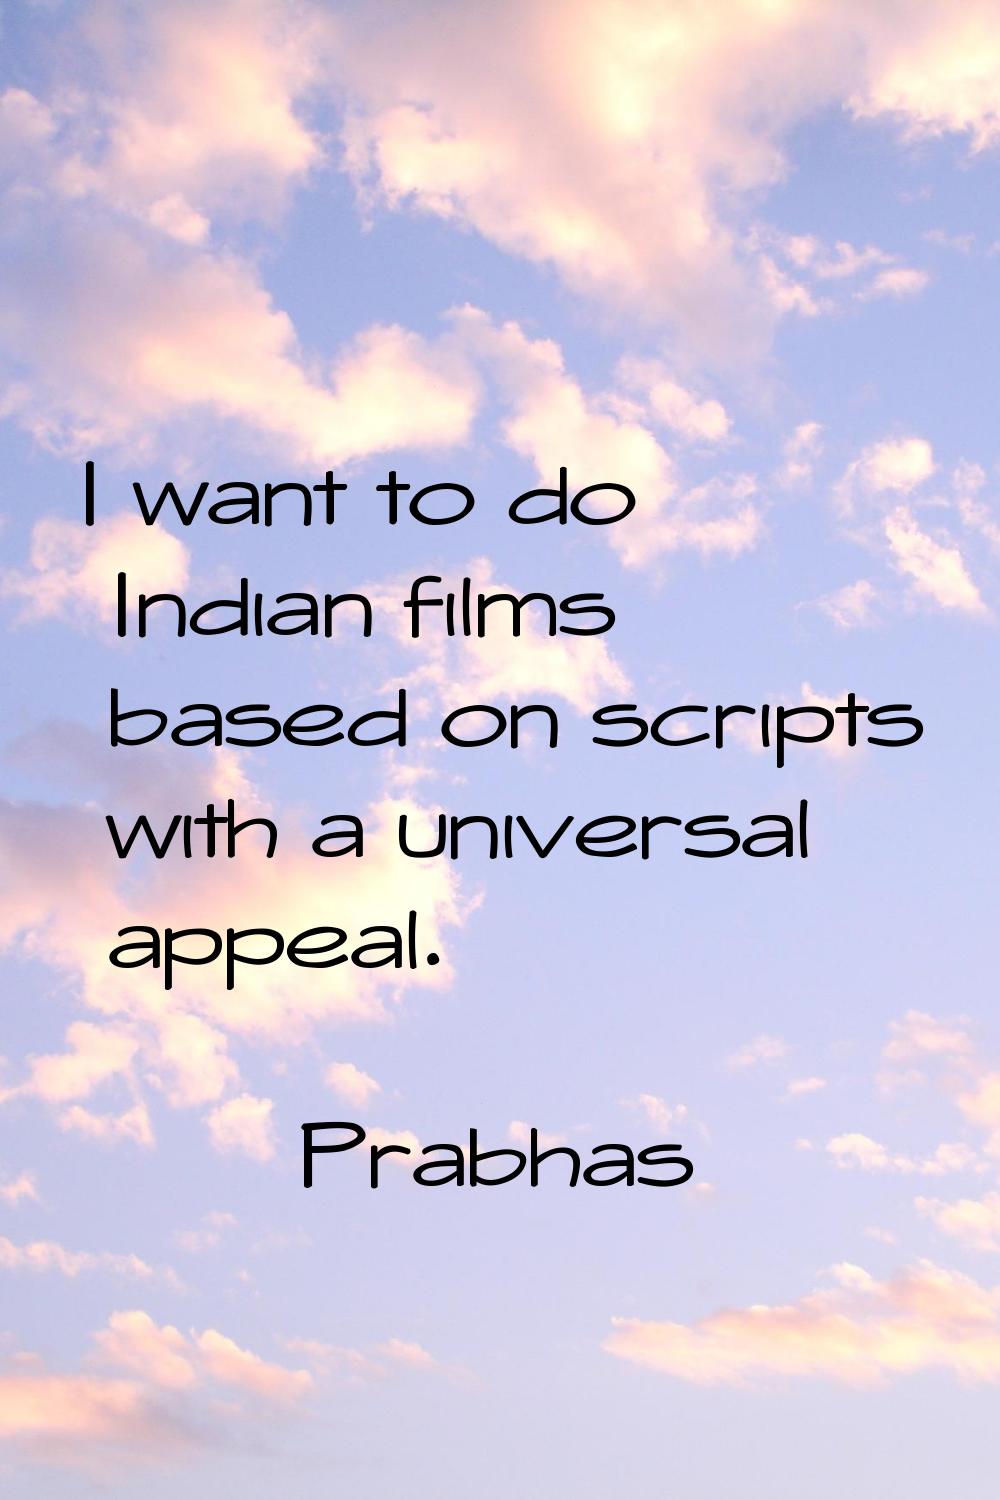 I want to do Indian films based on scripts with a universal appeal.